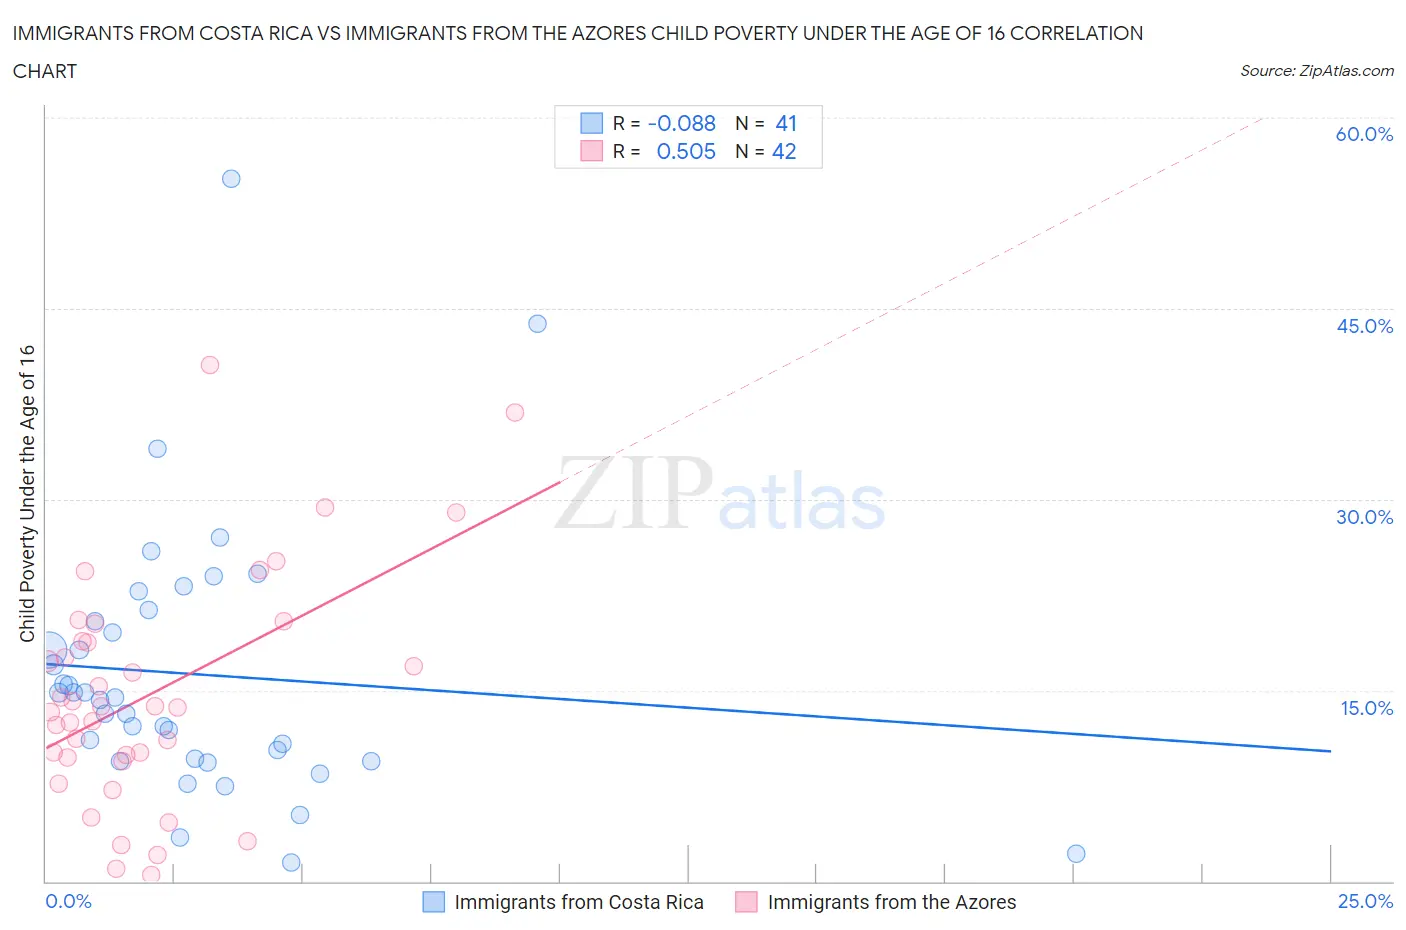 Immigrants from Costa Rica vs Immigrants from the Azores Child Poverty Under the Age of 16